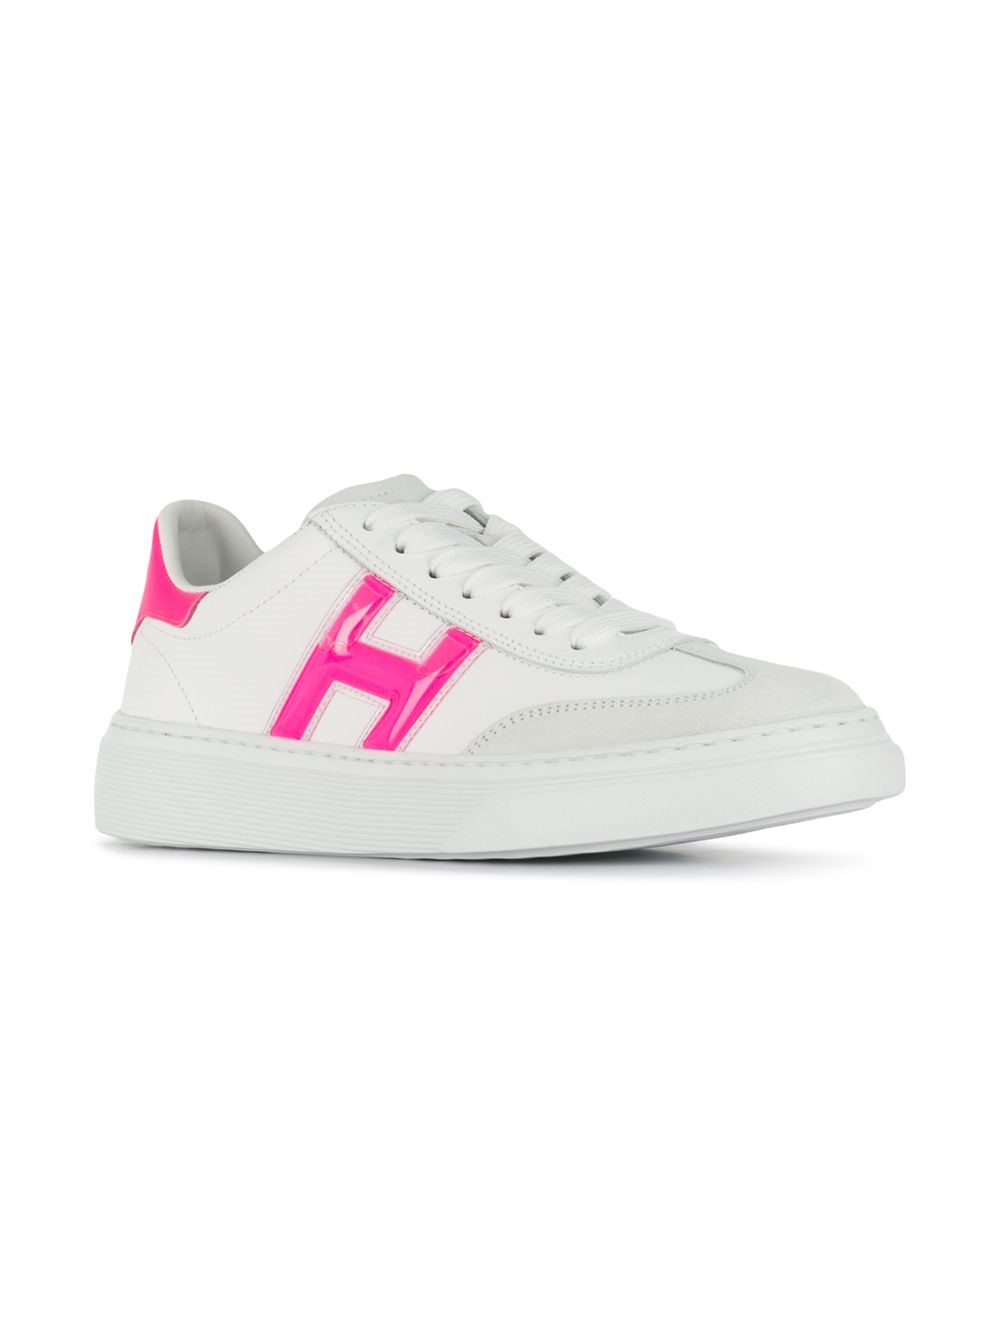 hogan LOGO SNEAKERS available on montiboutique.com - 26947